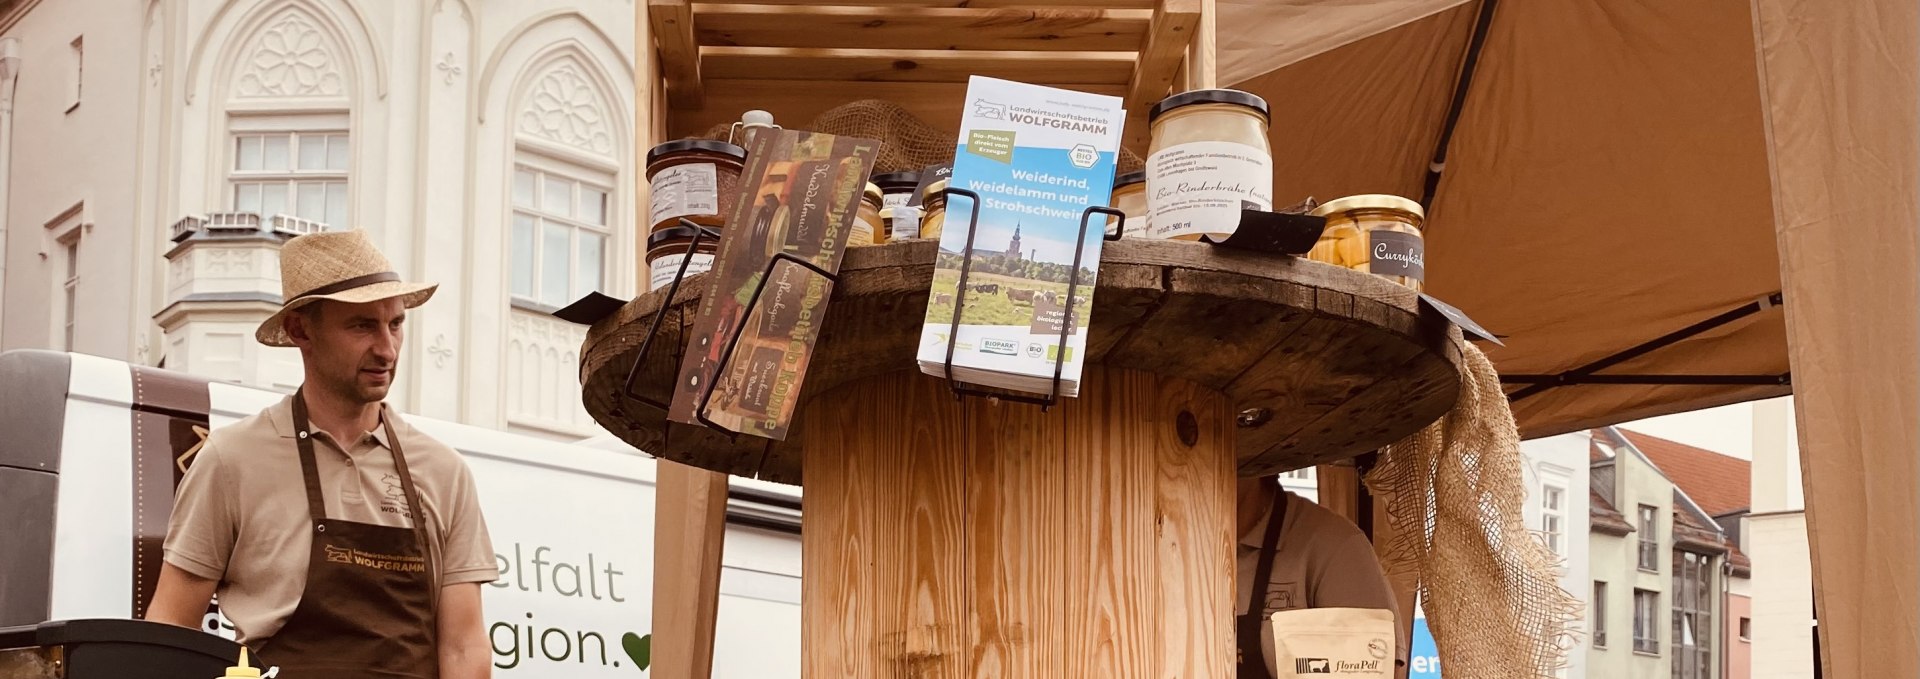 The regional store WOLFGRAMM is also represented at regional markets in Greifswald and the surrounding area. Products can also be tasted there., © Dörte Wolfgramm-Stühmeyer